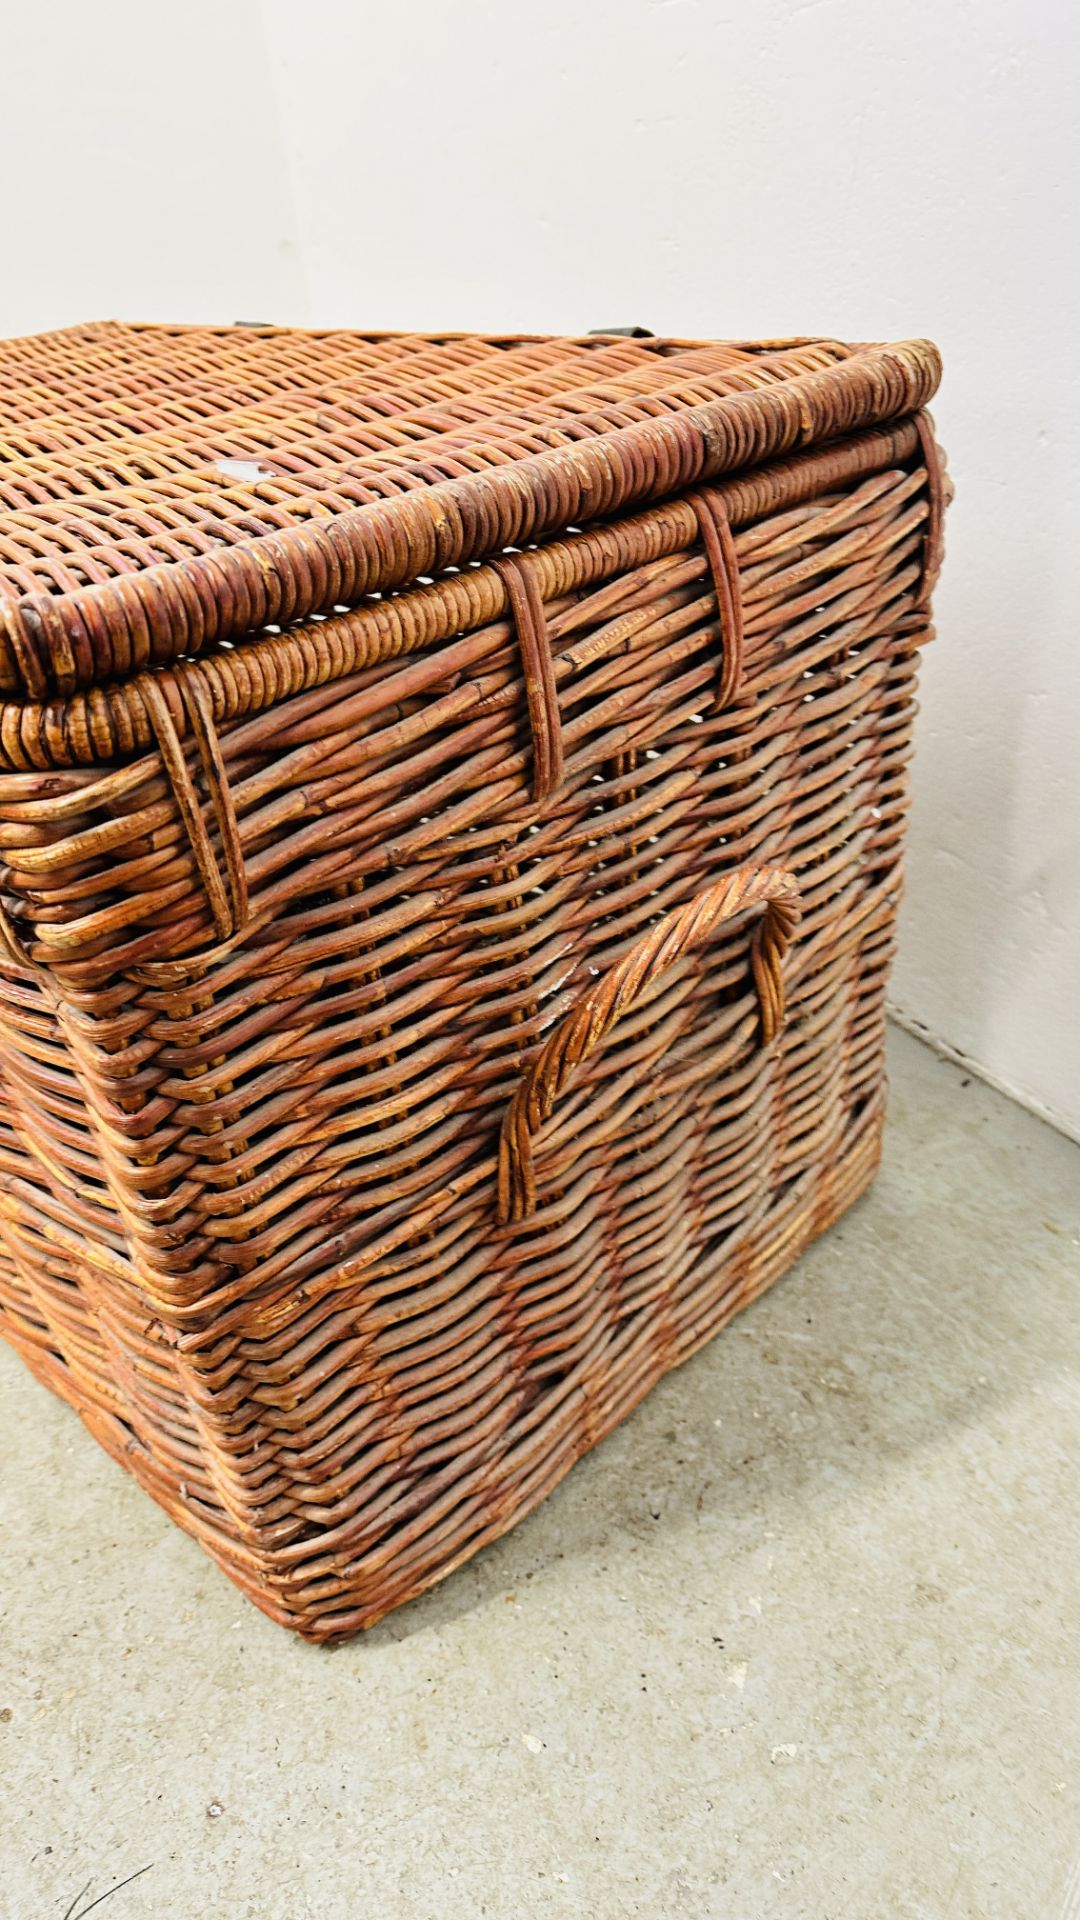 A LARGE WICKER TWO HANDLED BASKET - W 90 X D 55 X H 55CM. - Image 3 of 7